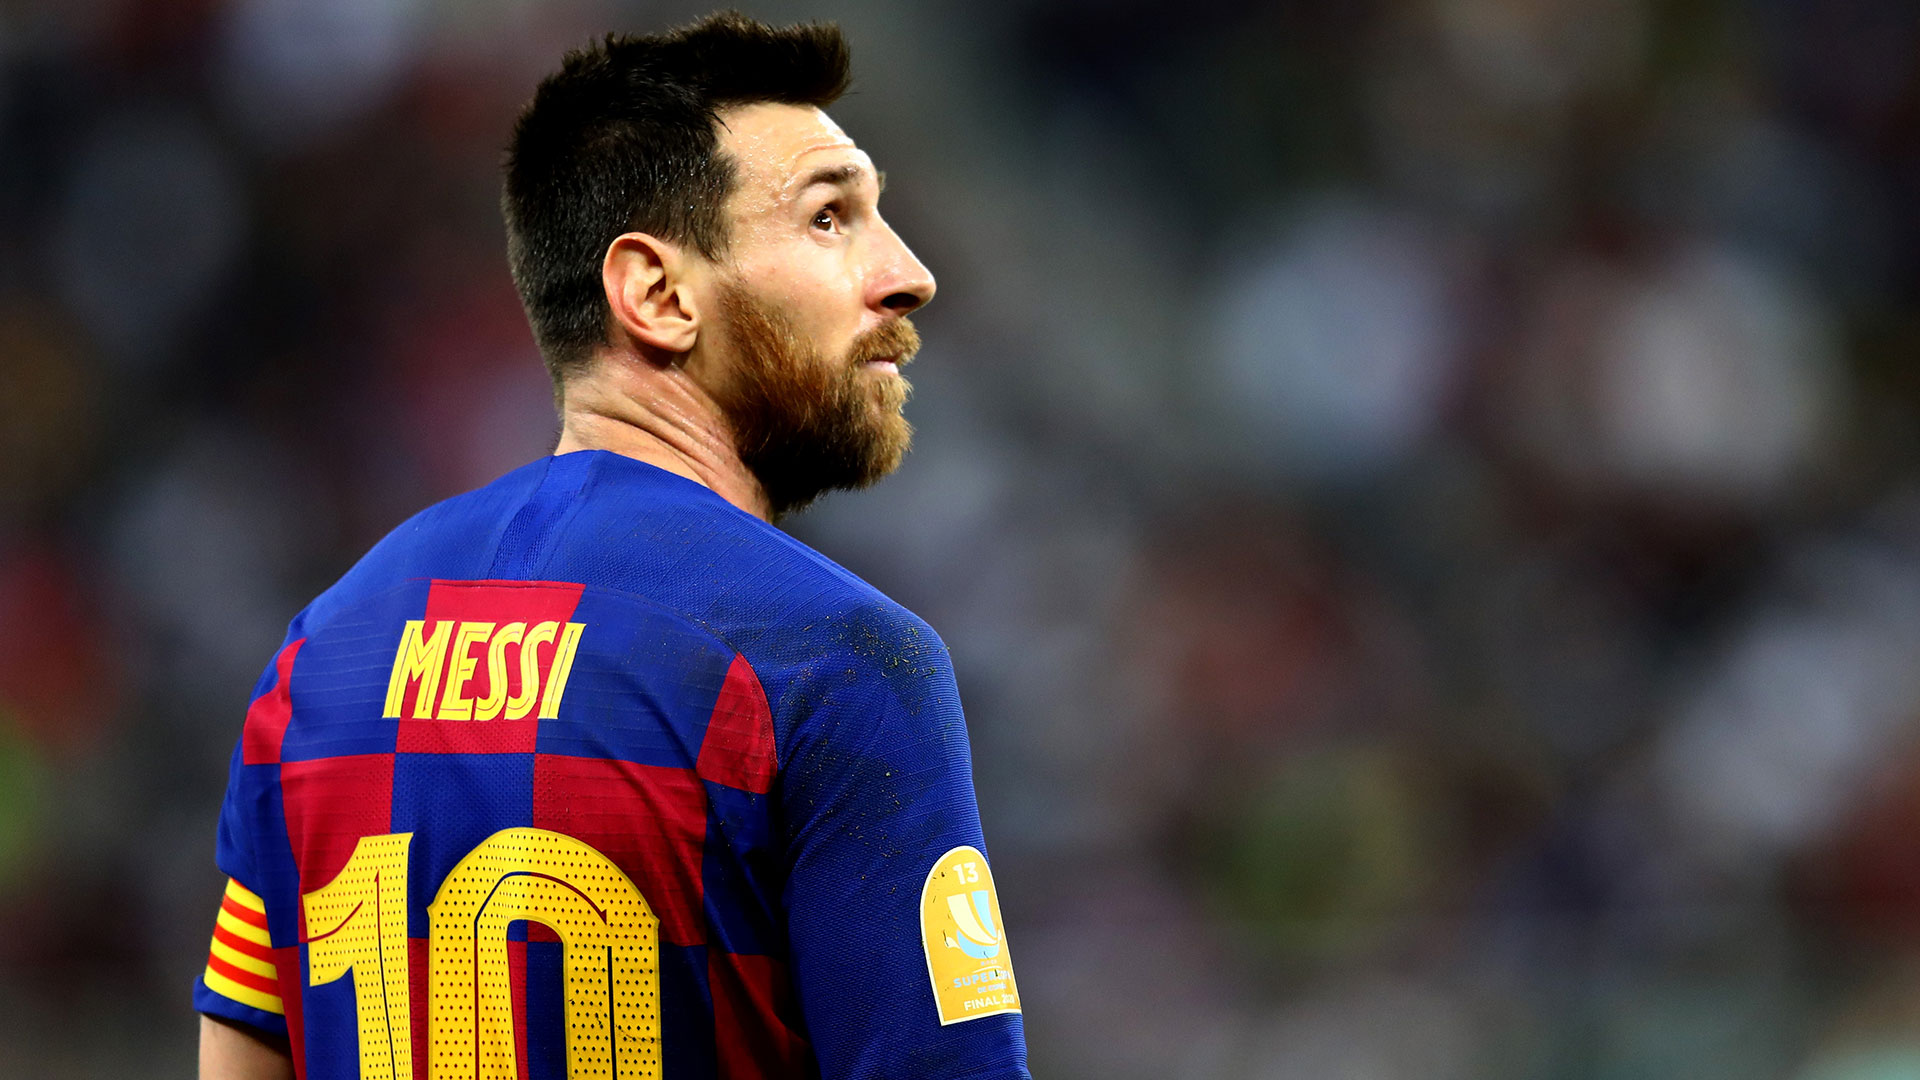 ‘Is it worth it?’ – Paul Merson questions Lionel Messi’s credentials and Man City move - Bóng Đá